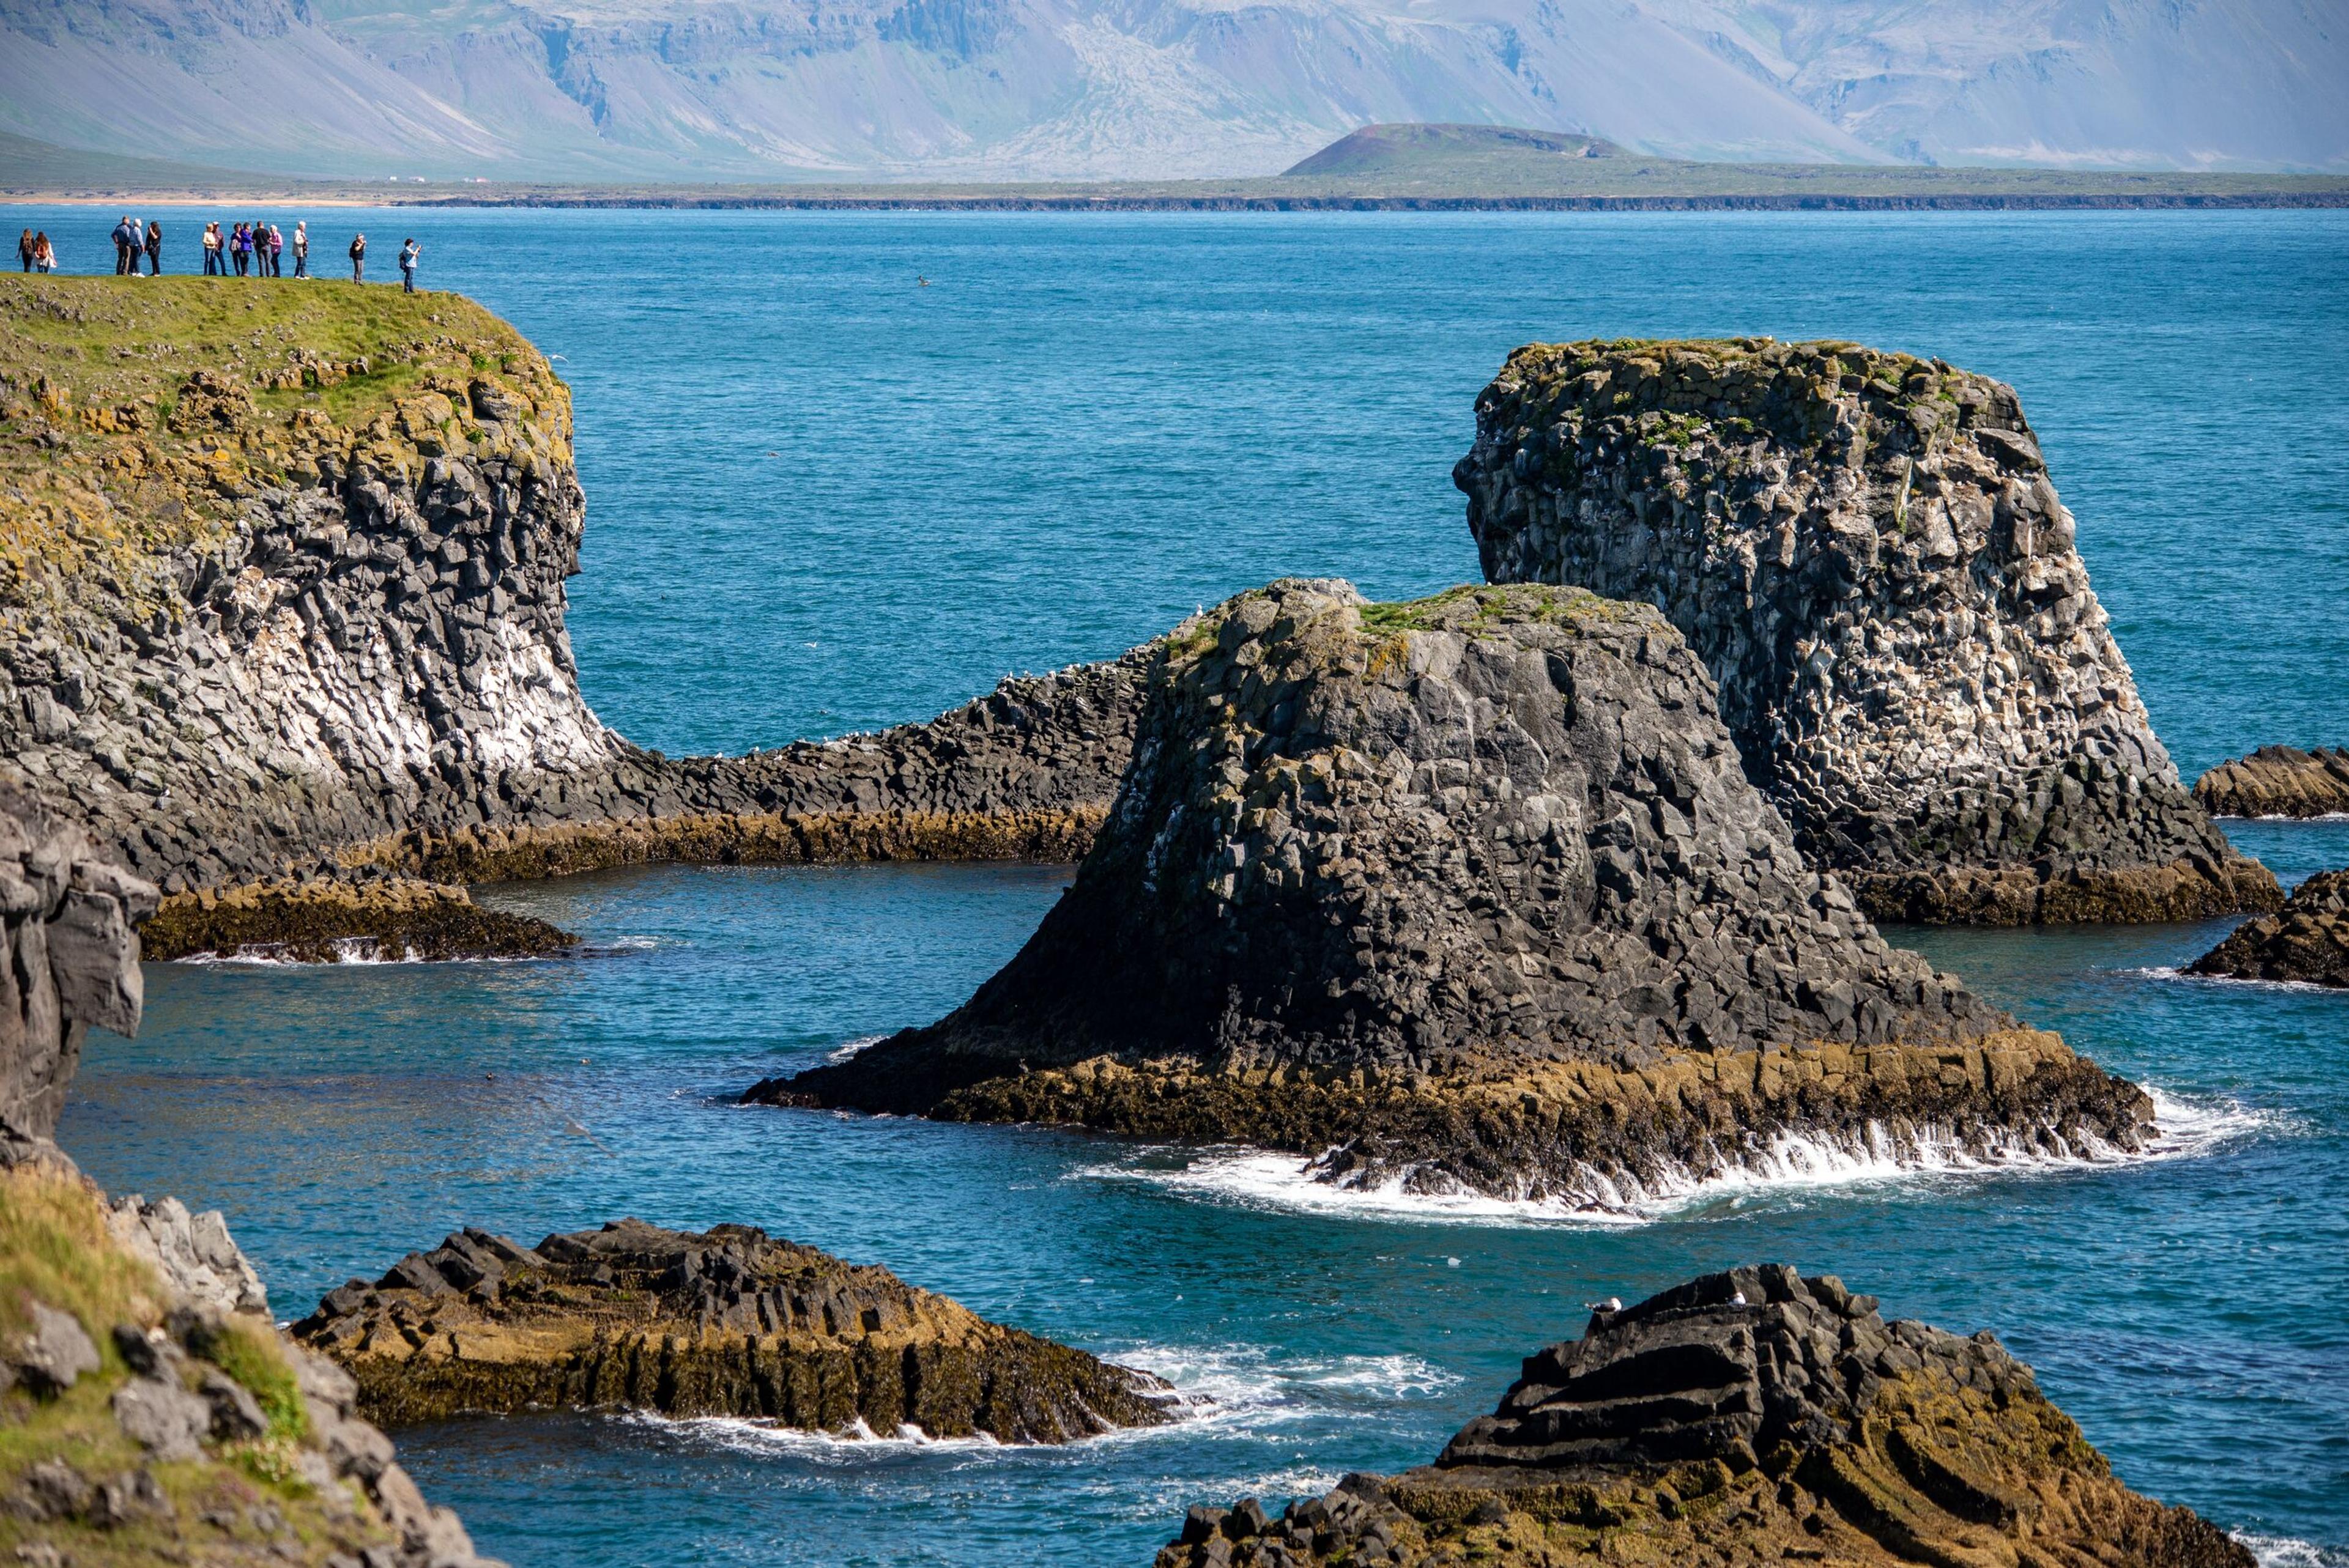 Rocky sea stacks rise from turquoise waters, framed by rugged cliffs. A small group of people stand on a cliff edge, overlooking the scenic view with mountains in the distance.